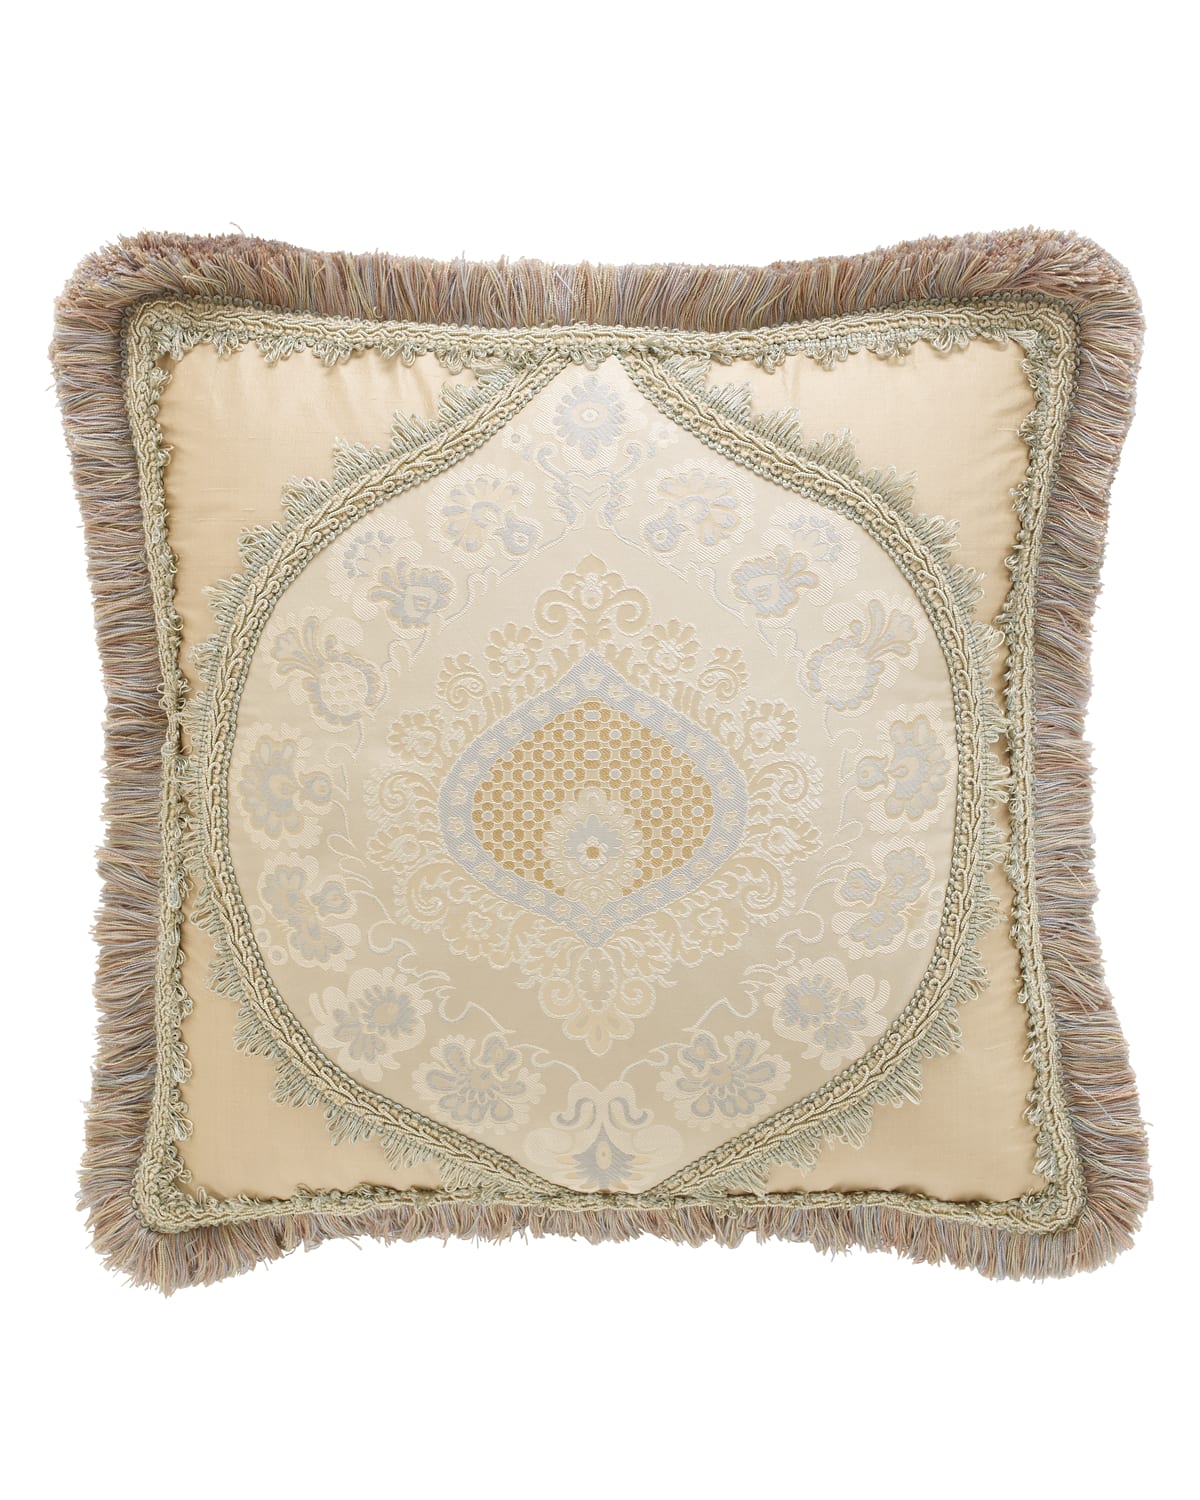 Image Sweet Dreams Crystal Palace Medallion-Center Pillow, 15"Sq.